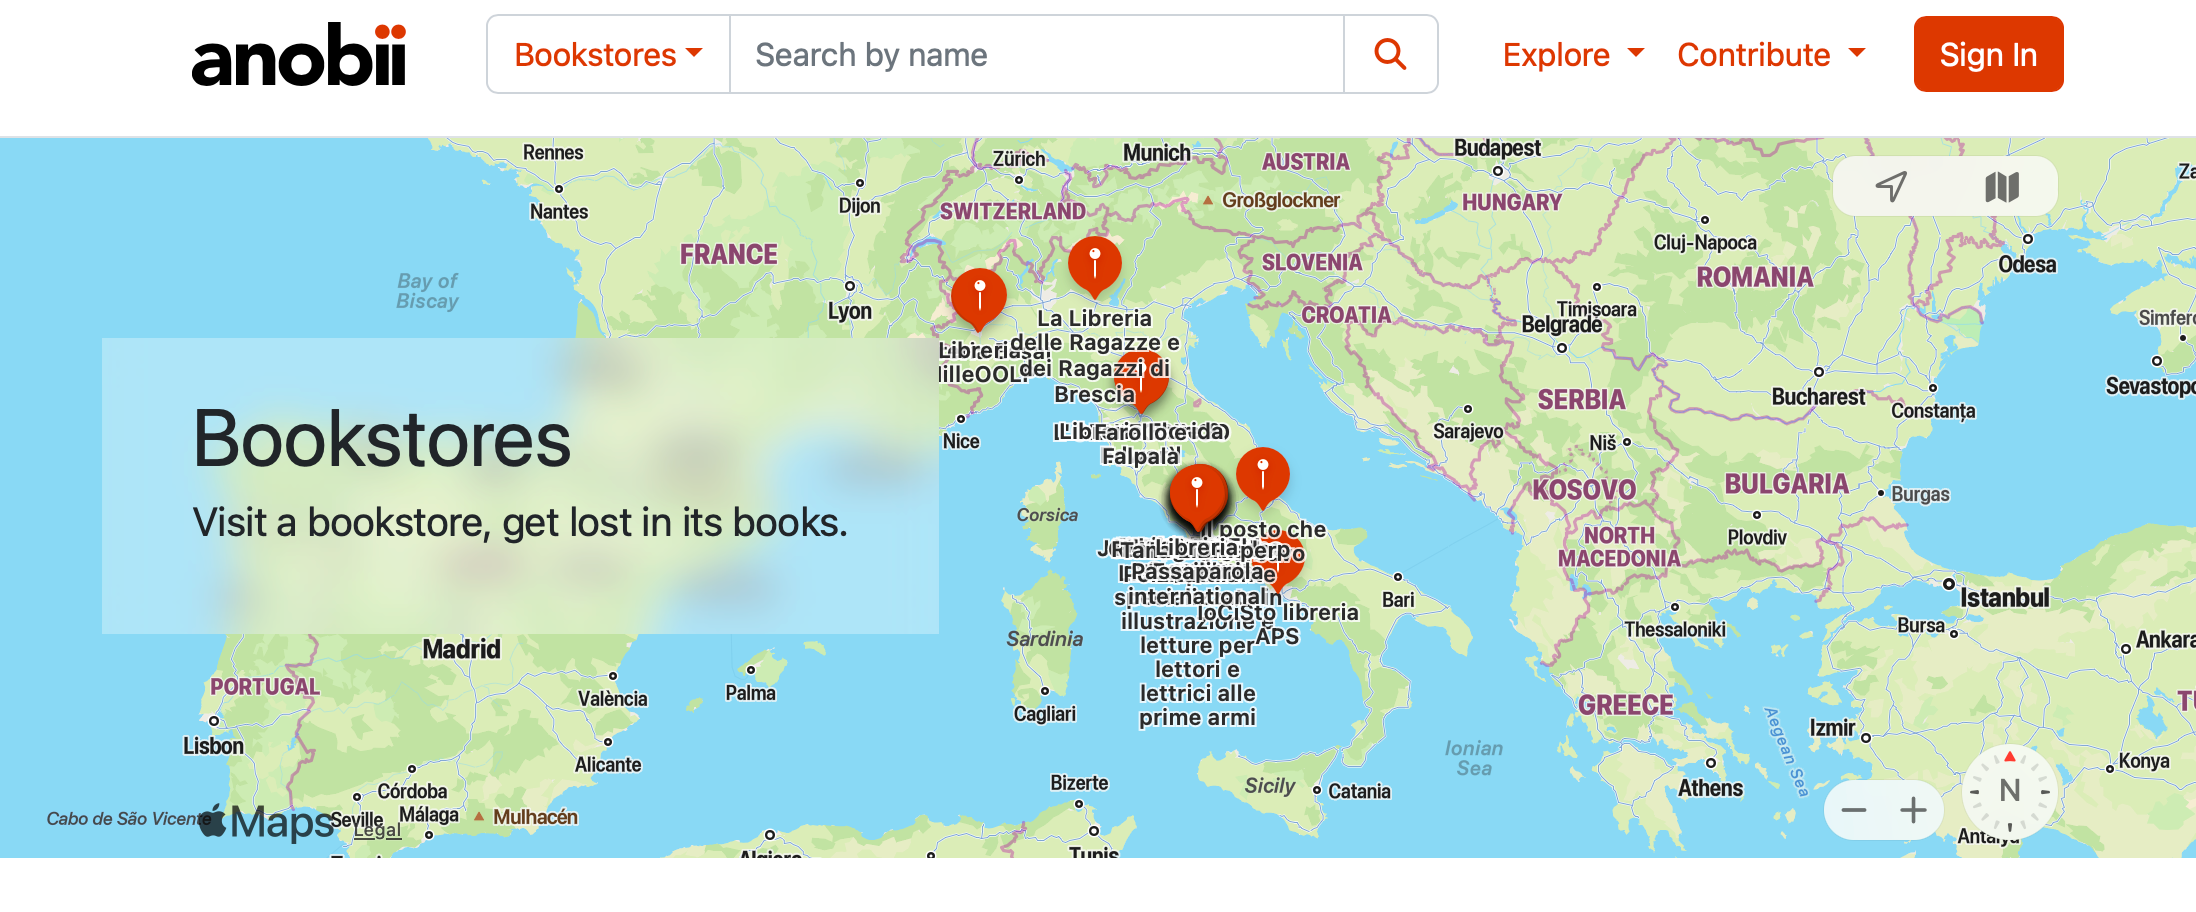 Screenshot of anobii website with interactive map to find bookstores in Italy